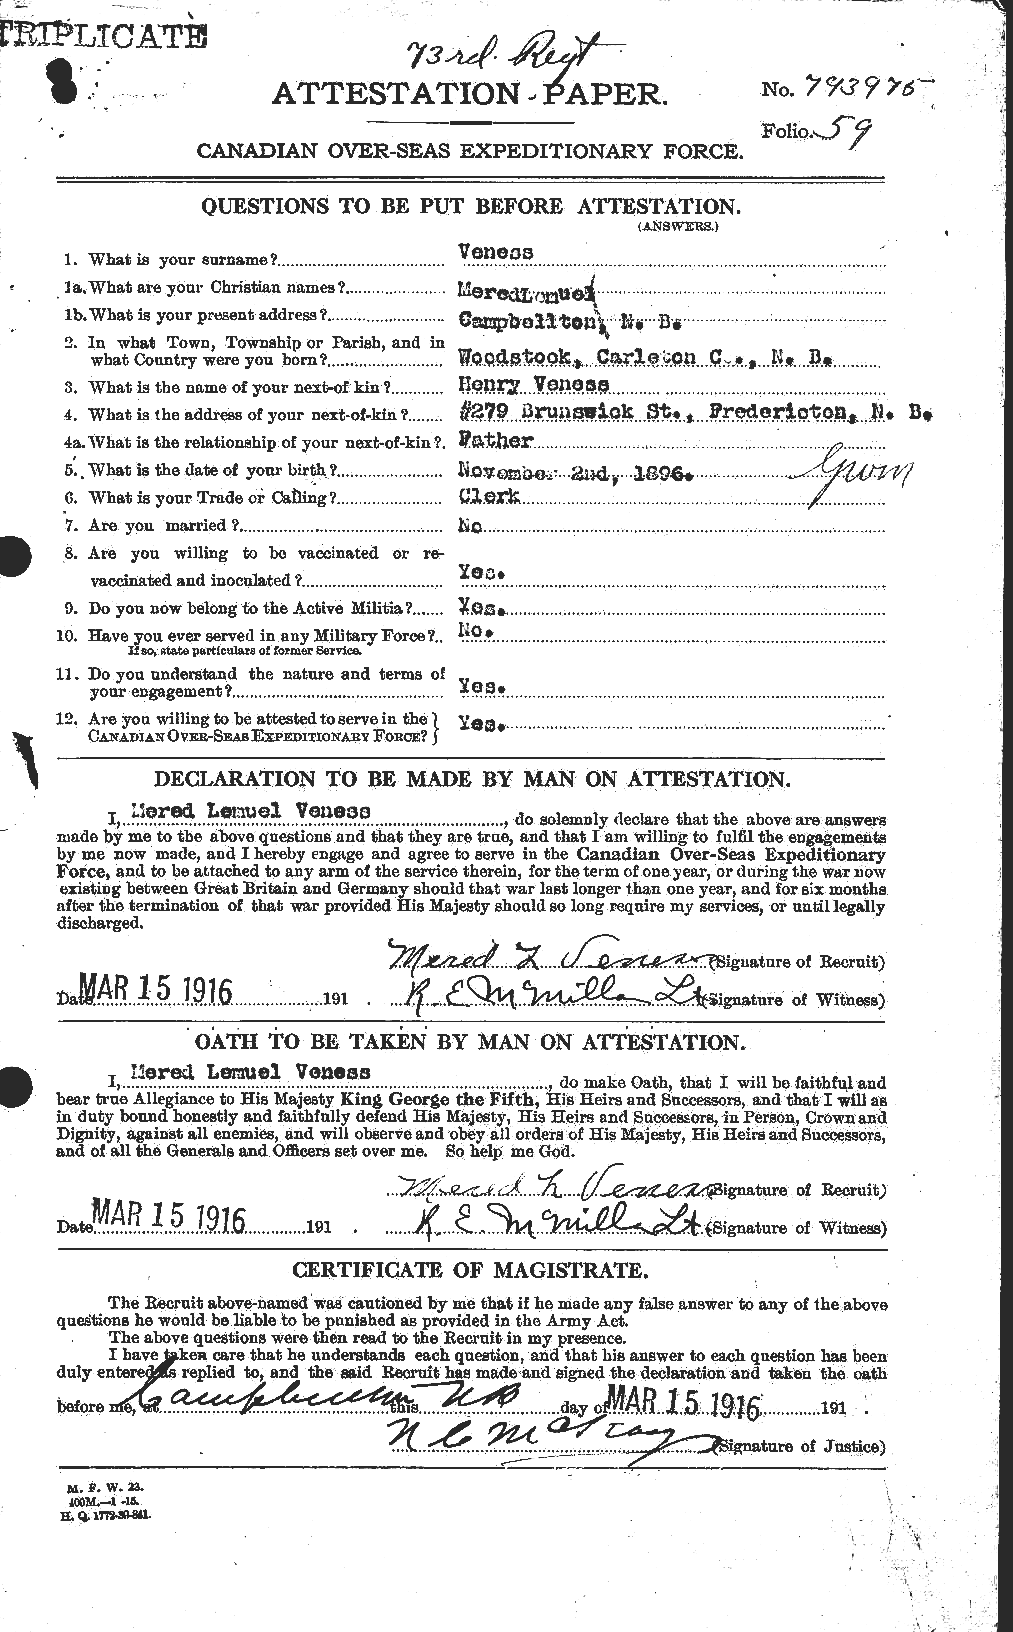 Personnel Records of the First World War - CEF 649271a